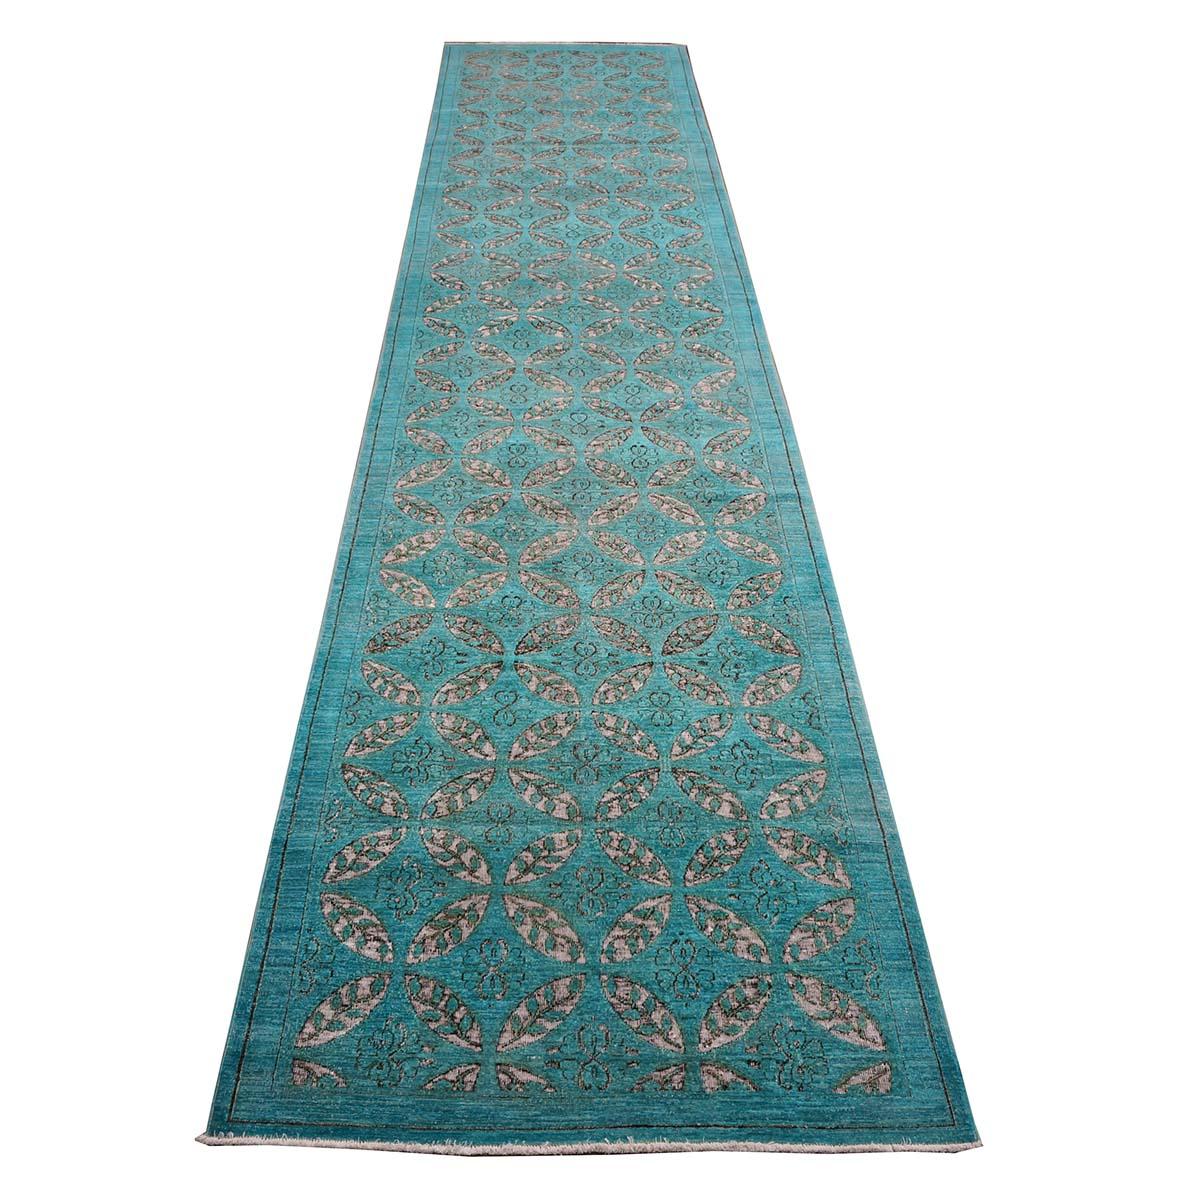 Ashly Fine Rugs presents a new distressed modern Afghan rug. These rugs have been overdyed and distressed with a custom design to give them an antique feel, yet a modern look. This piece was overdyed with a beautiful teal blue color, along with the